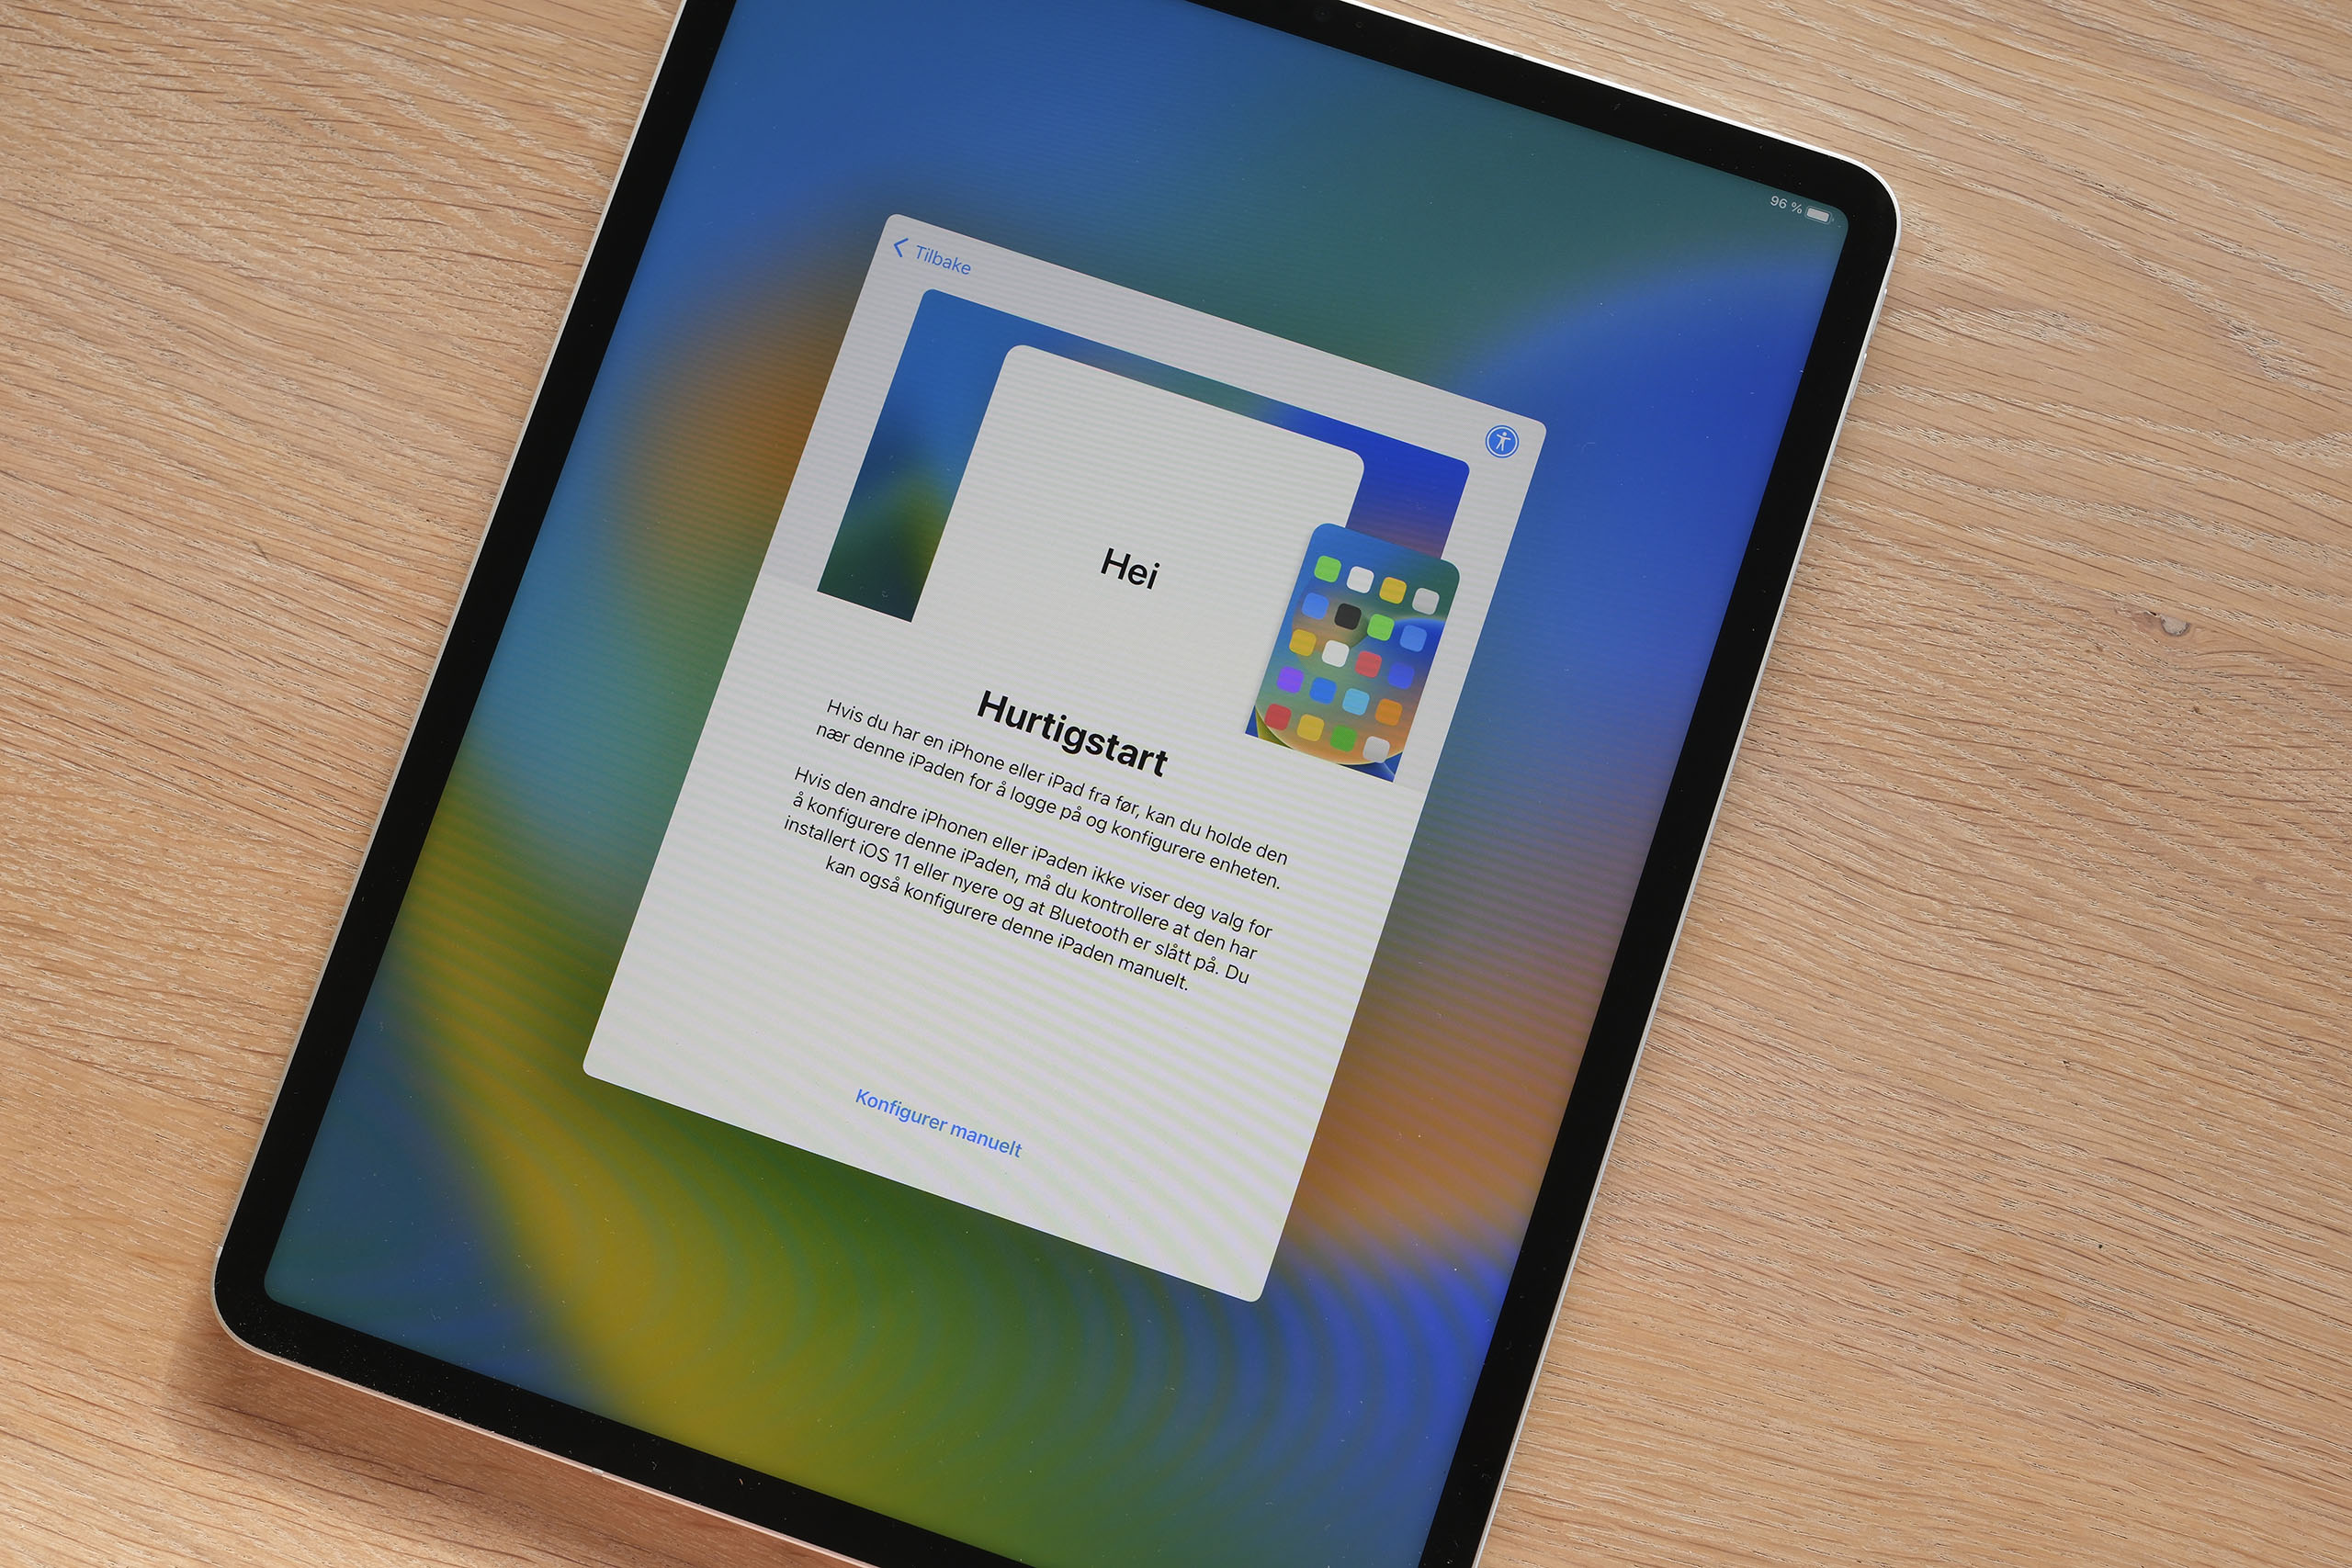 iPad Pro 2022 (M2) review: The ultimate tablet for creative pros